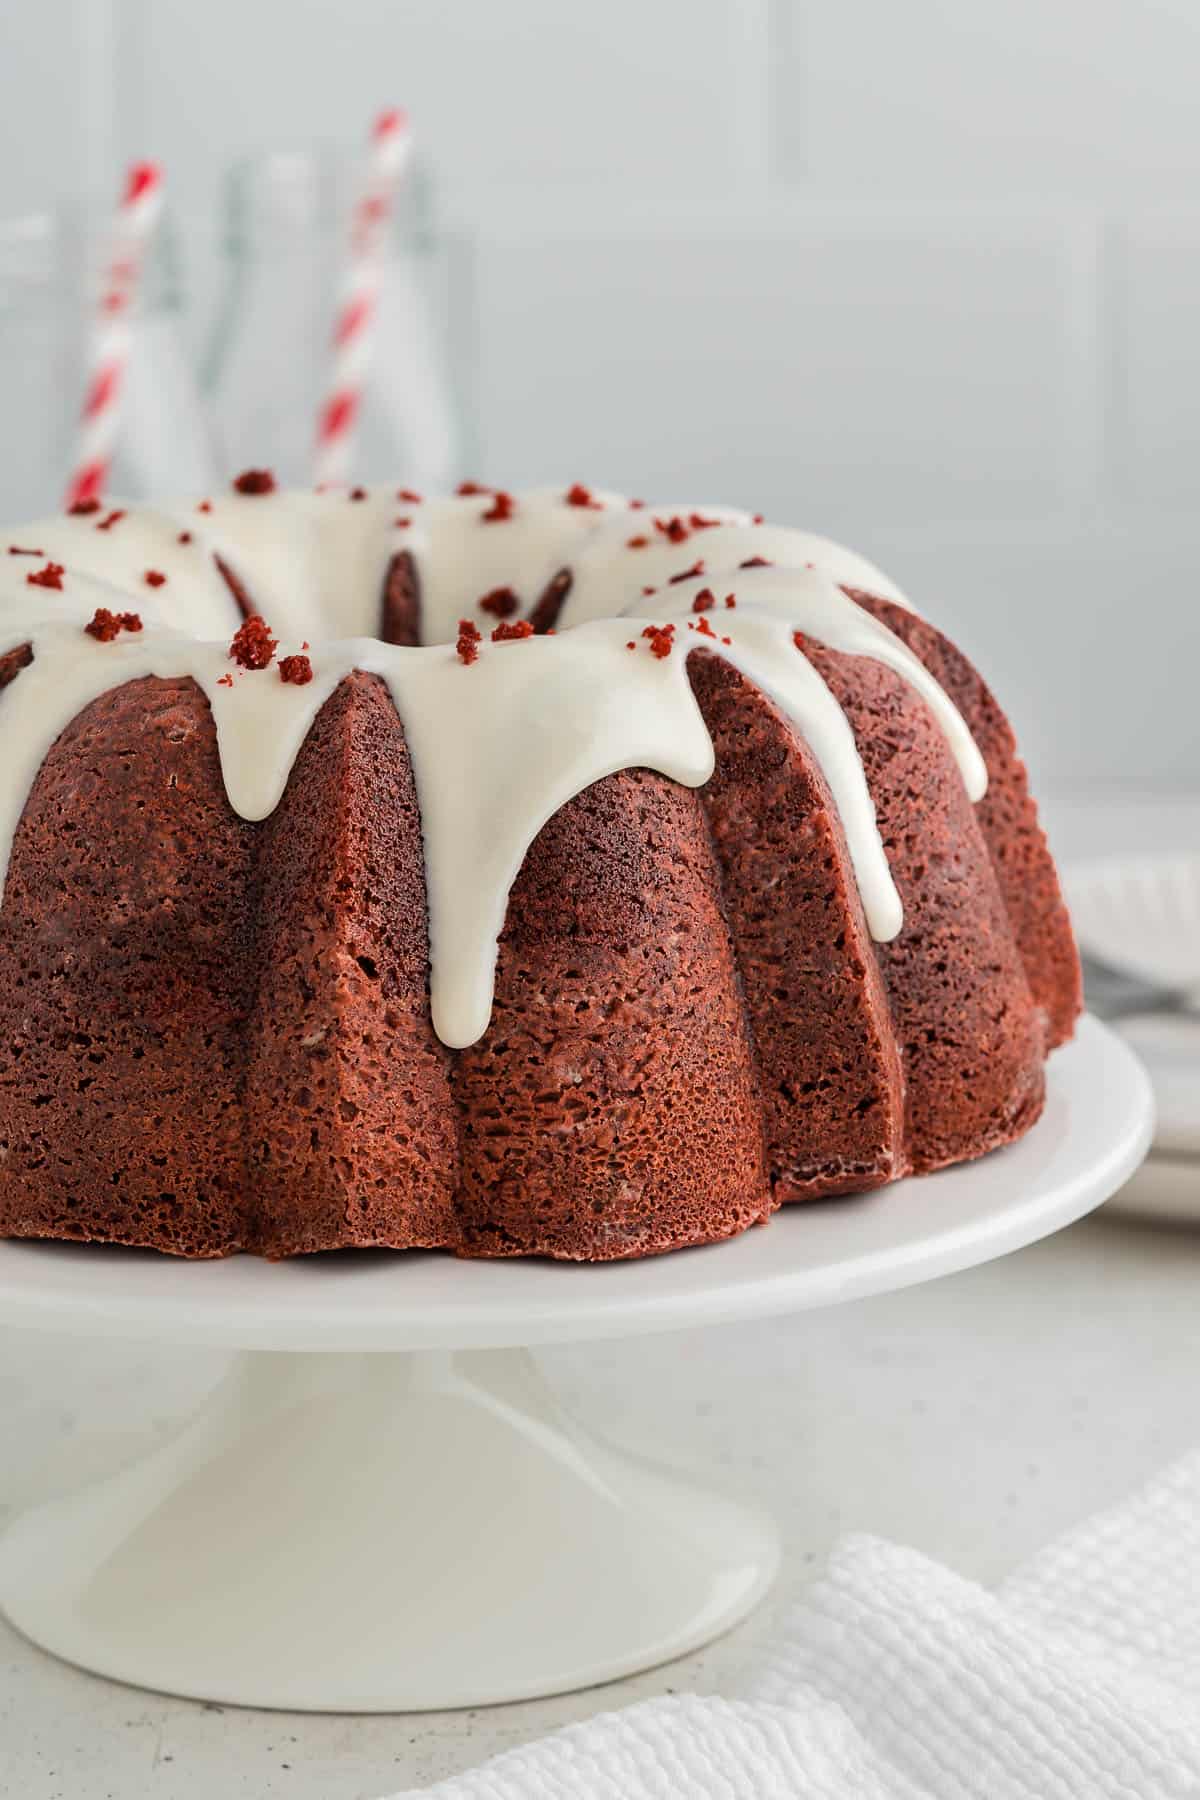 Red velvet bundt cake with cream cheese frosting on a white cake stand.